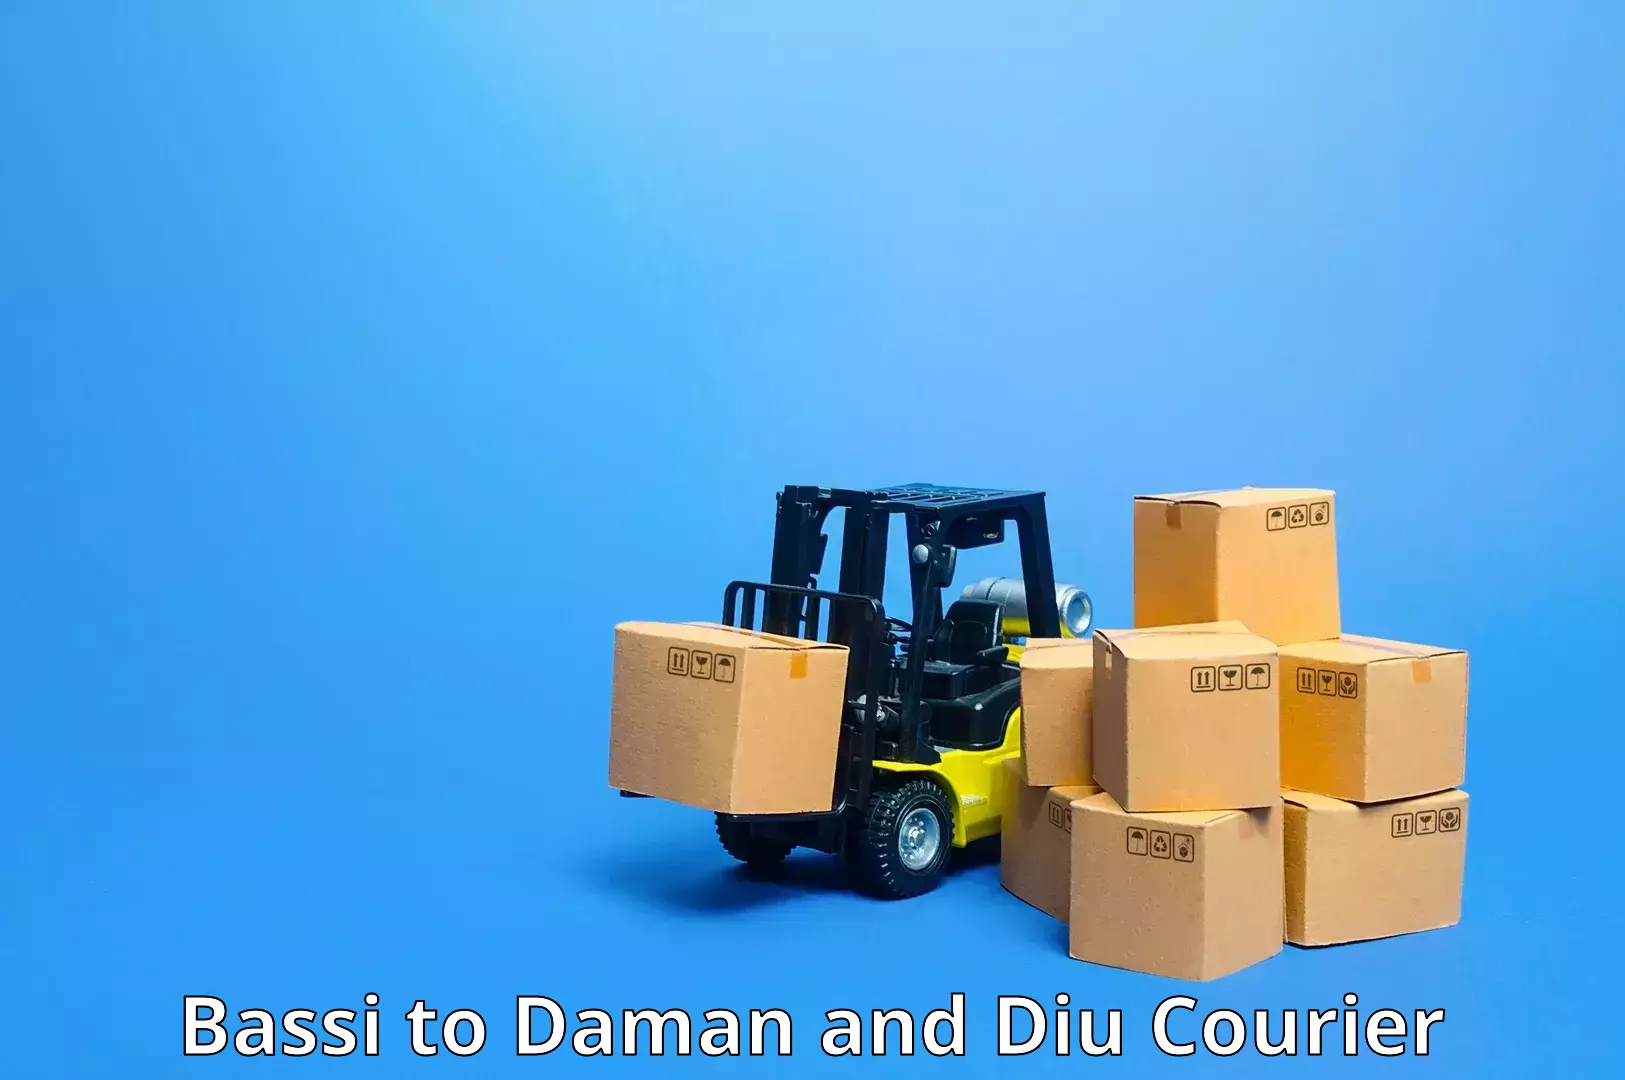 Reliable package handling Bassi to Daman and Diu